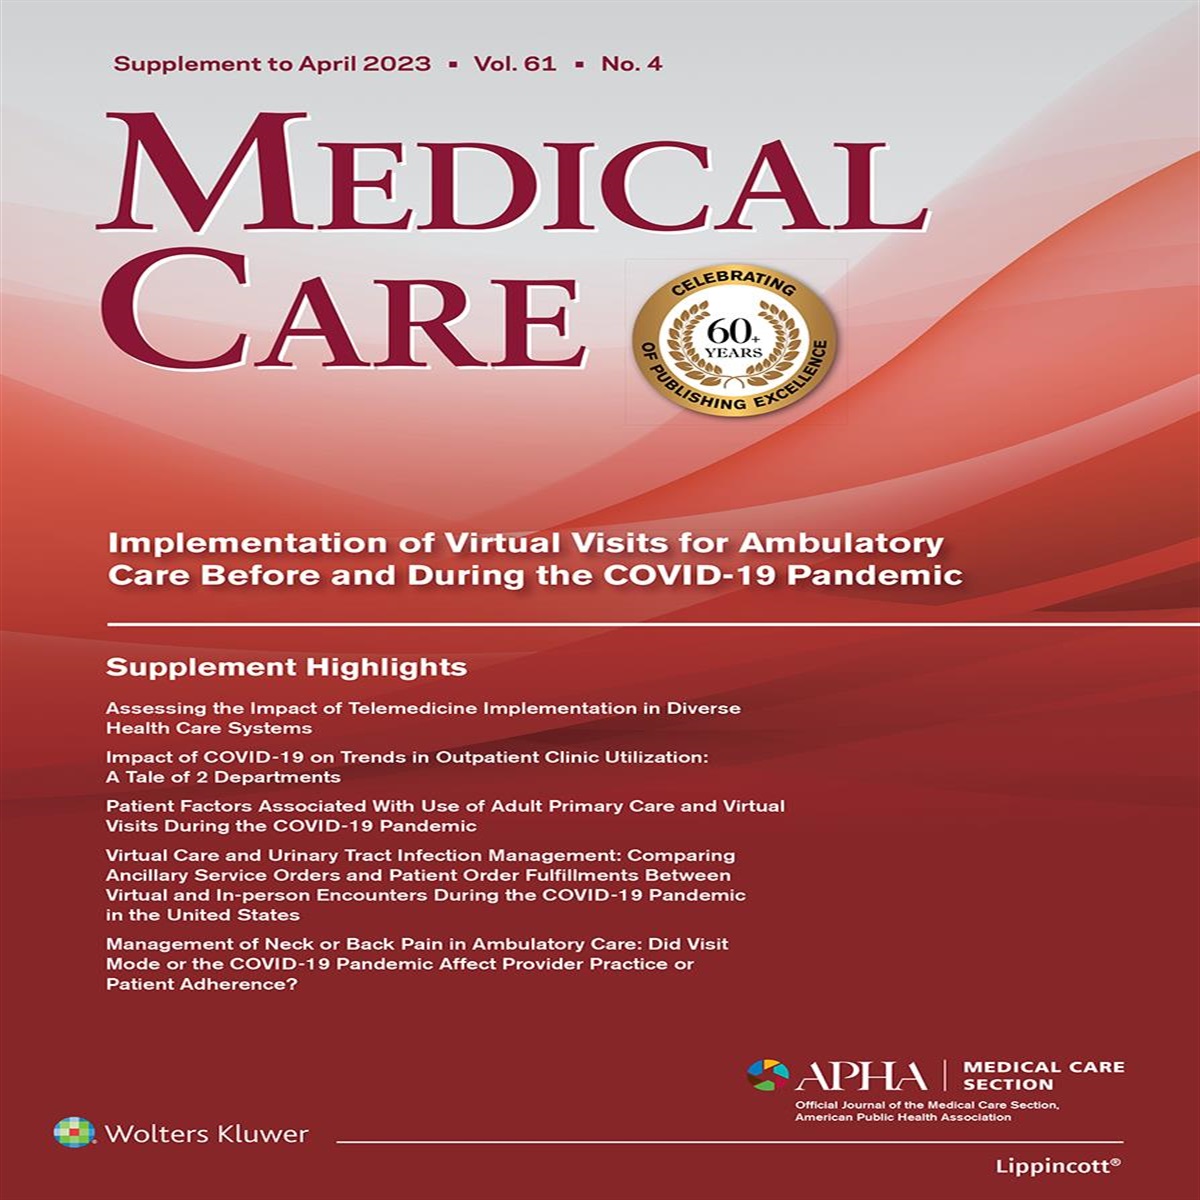 Acknowledgments: Implementation of Virtual Visits for Ambulatory Care Before and During the COVID-19 Pandemic